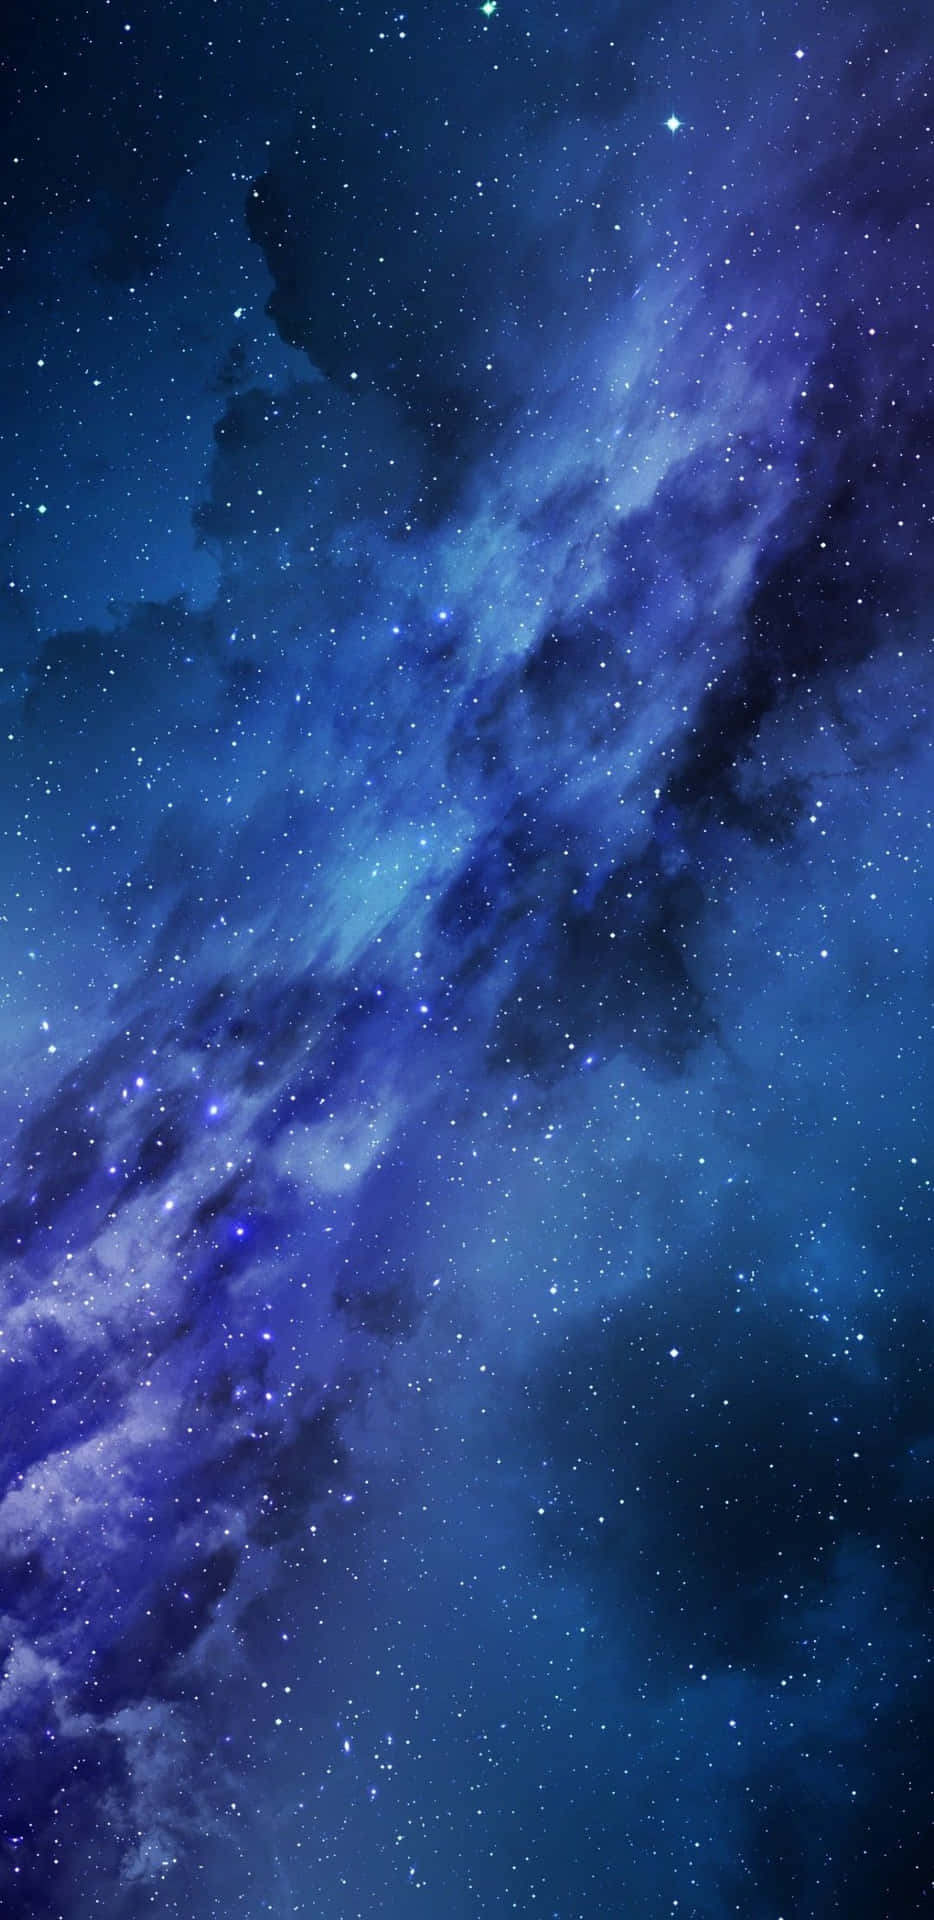 Join the Blue Galaxy Experience with iPhone Wallpaper